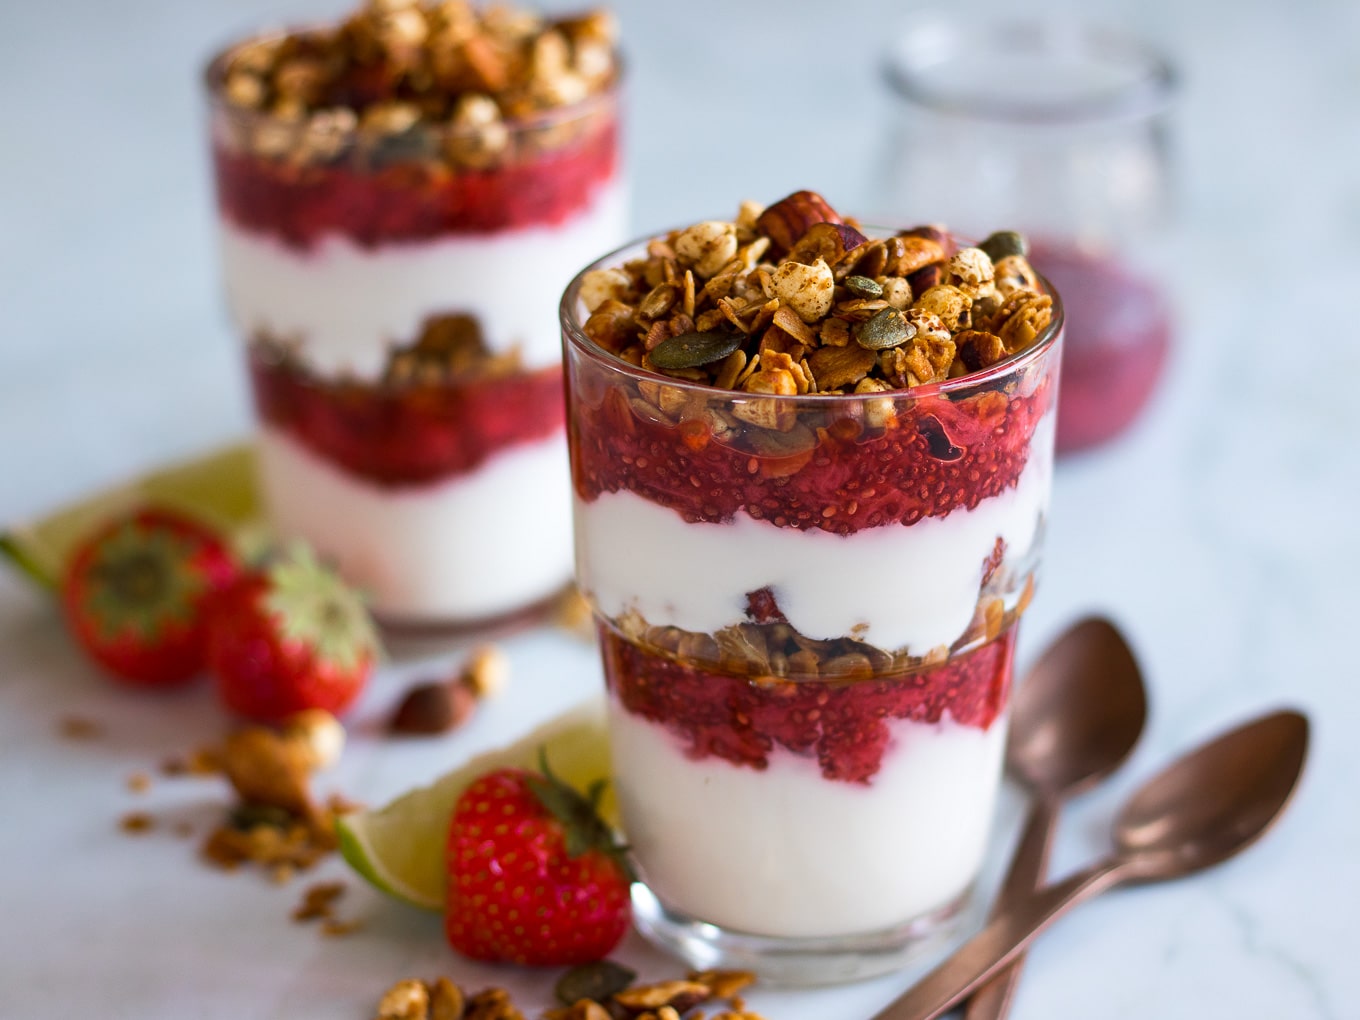 Strawberry Lime Chia Yoghurt Parfaits make a beautiful but simple breakfast, snack or even a healthy dessert! They're perfect to meal prep and can be made gluten free and dairy free too.